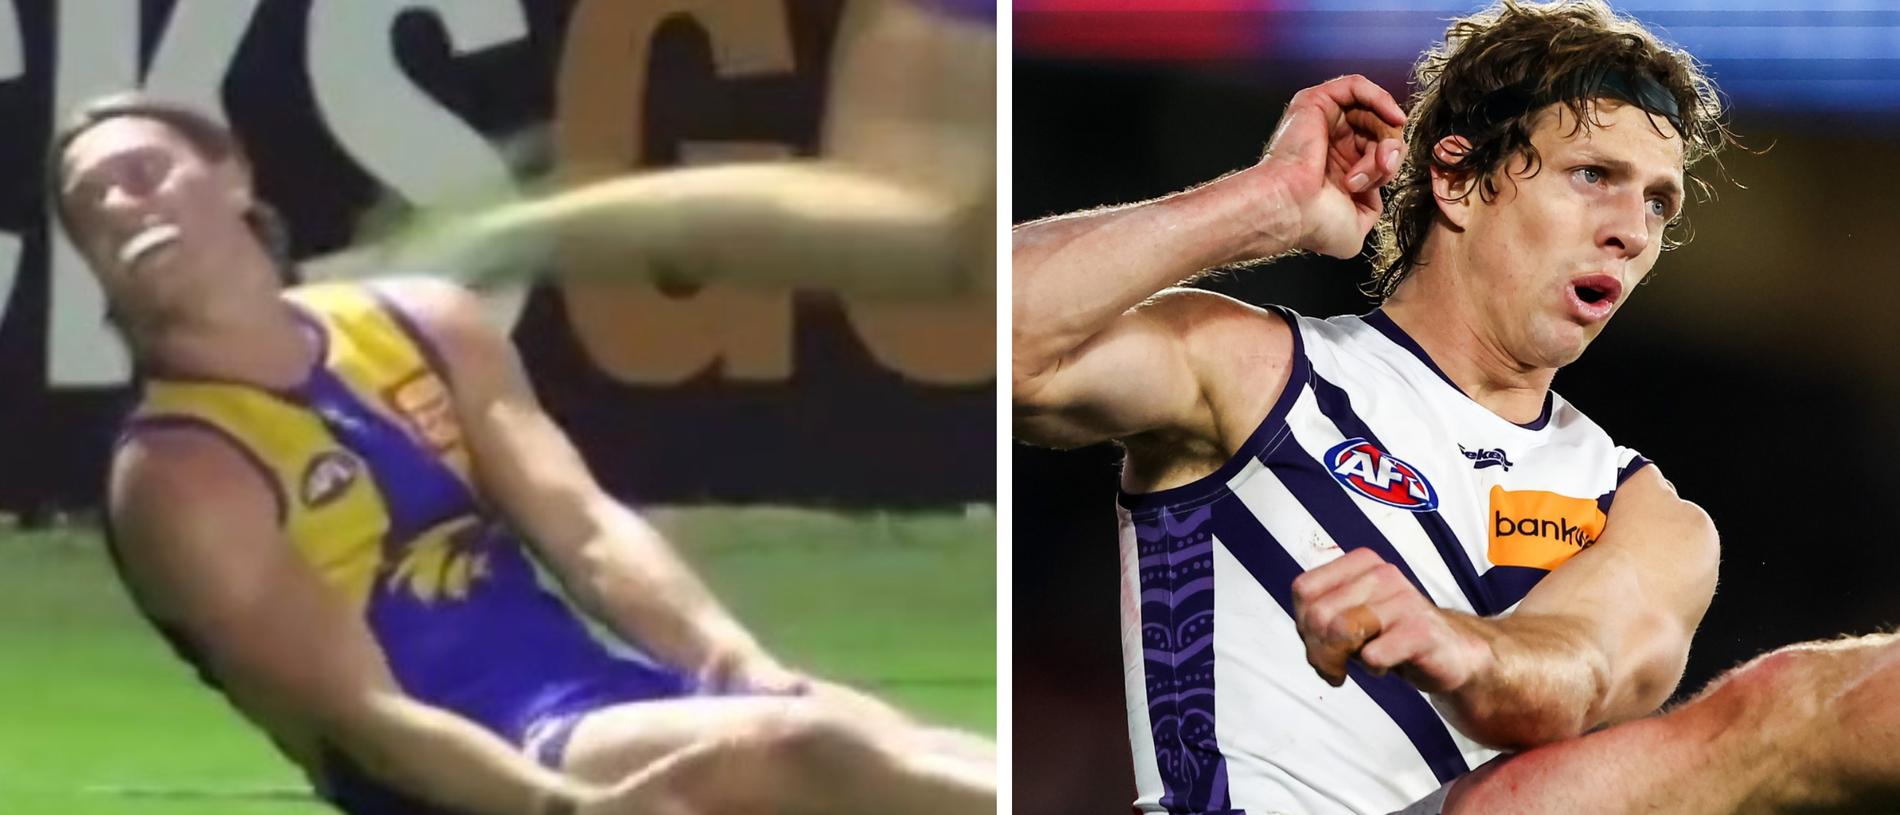 The Dockers were too good for the Eagles on Saturday.